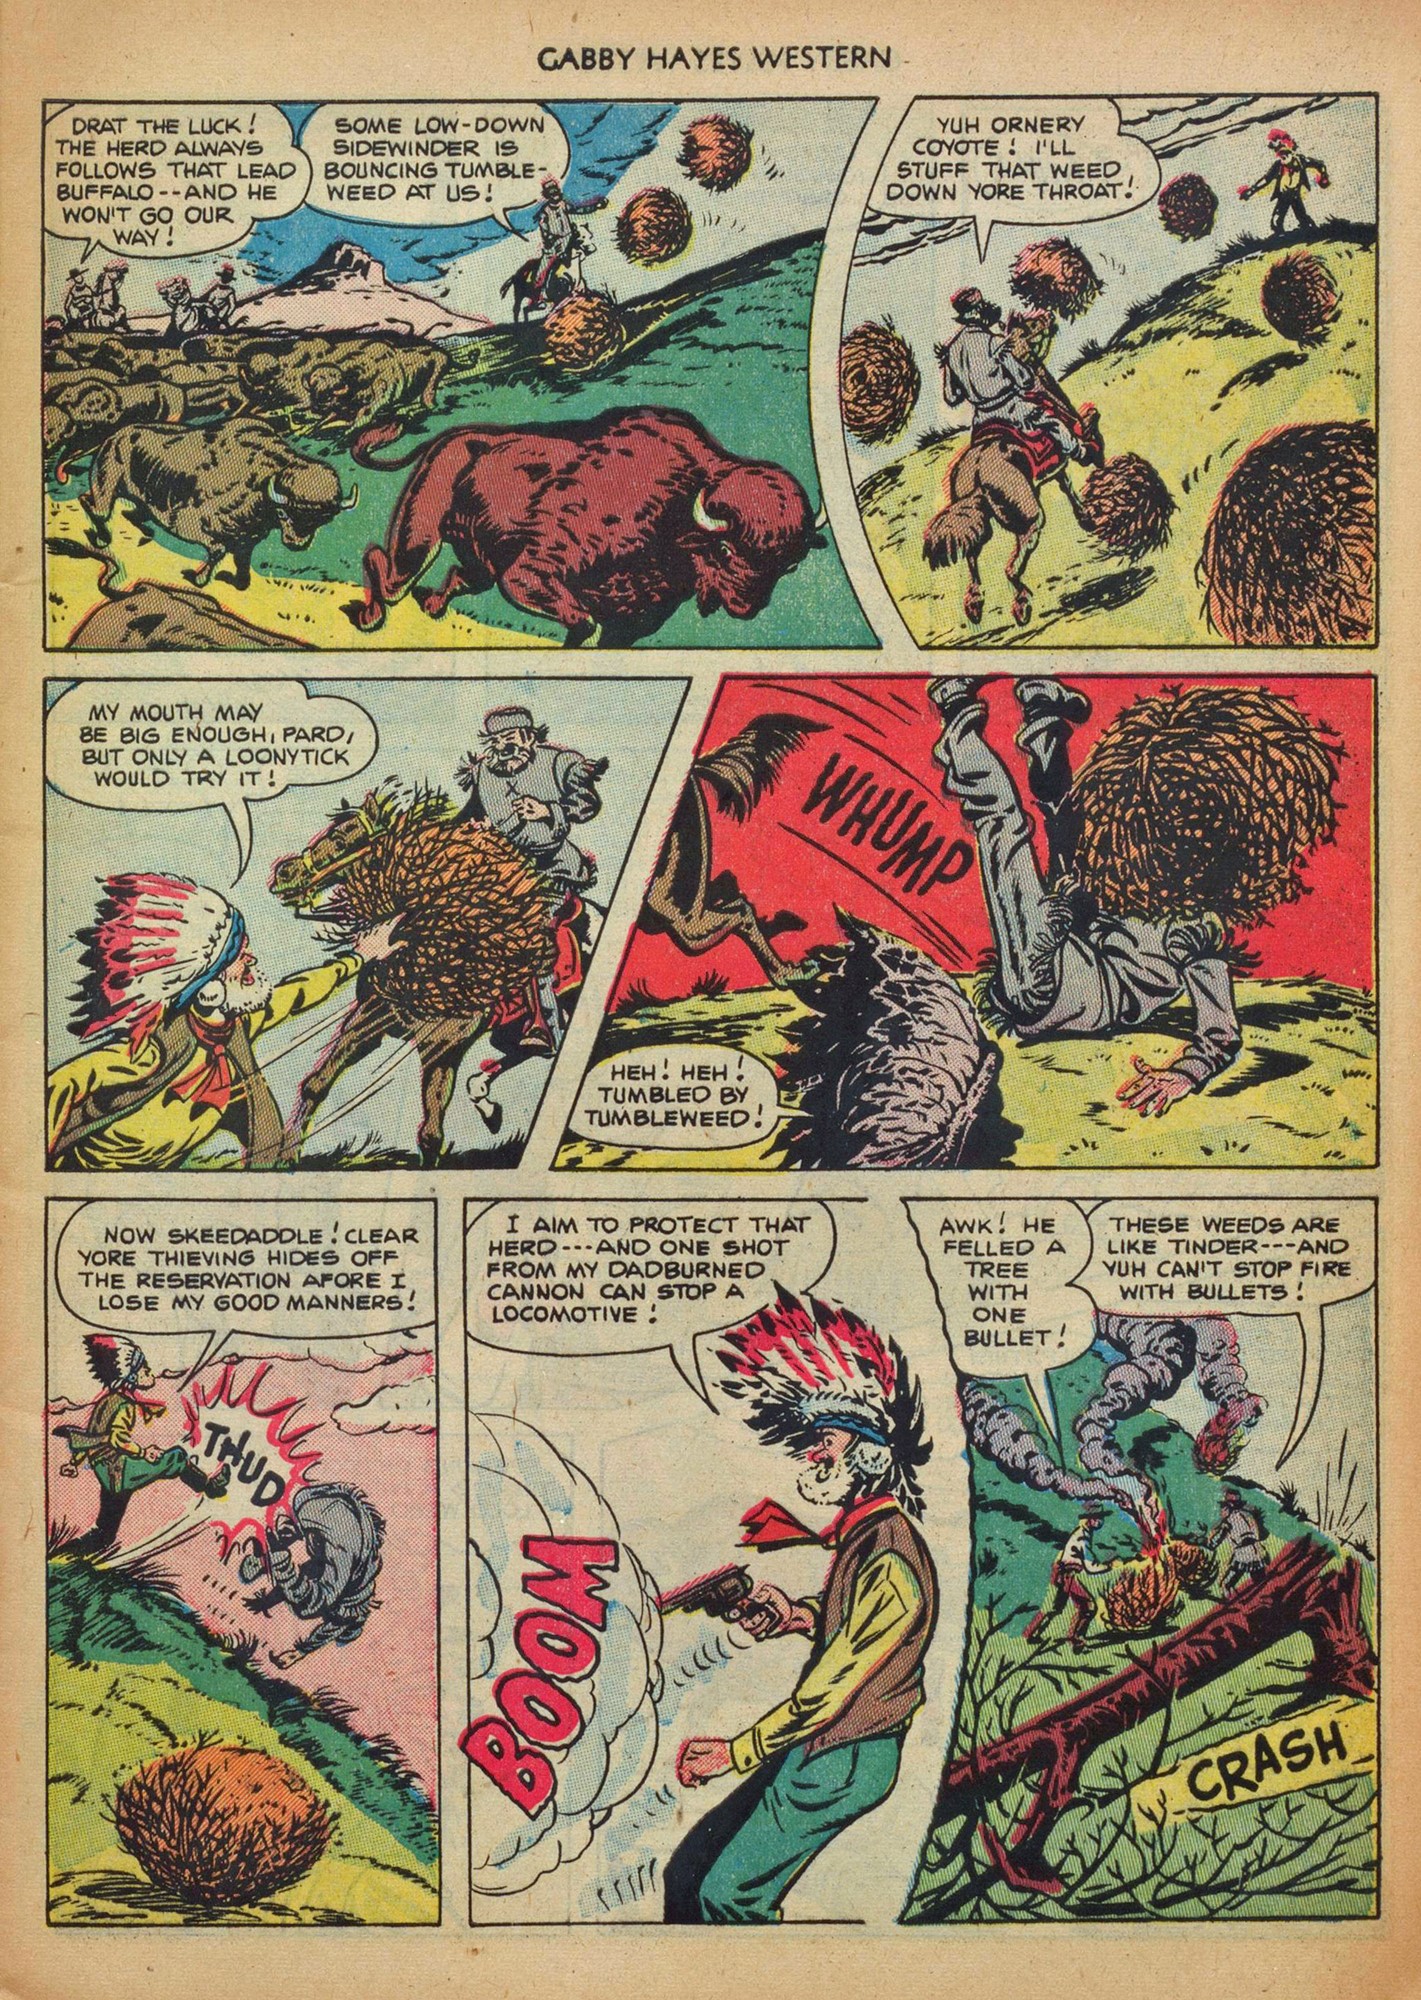 Read online Gabby Hayes Western comic -  Issue #44 - 5